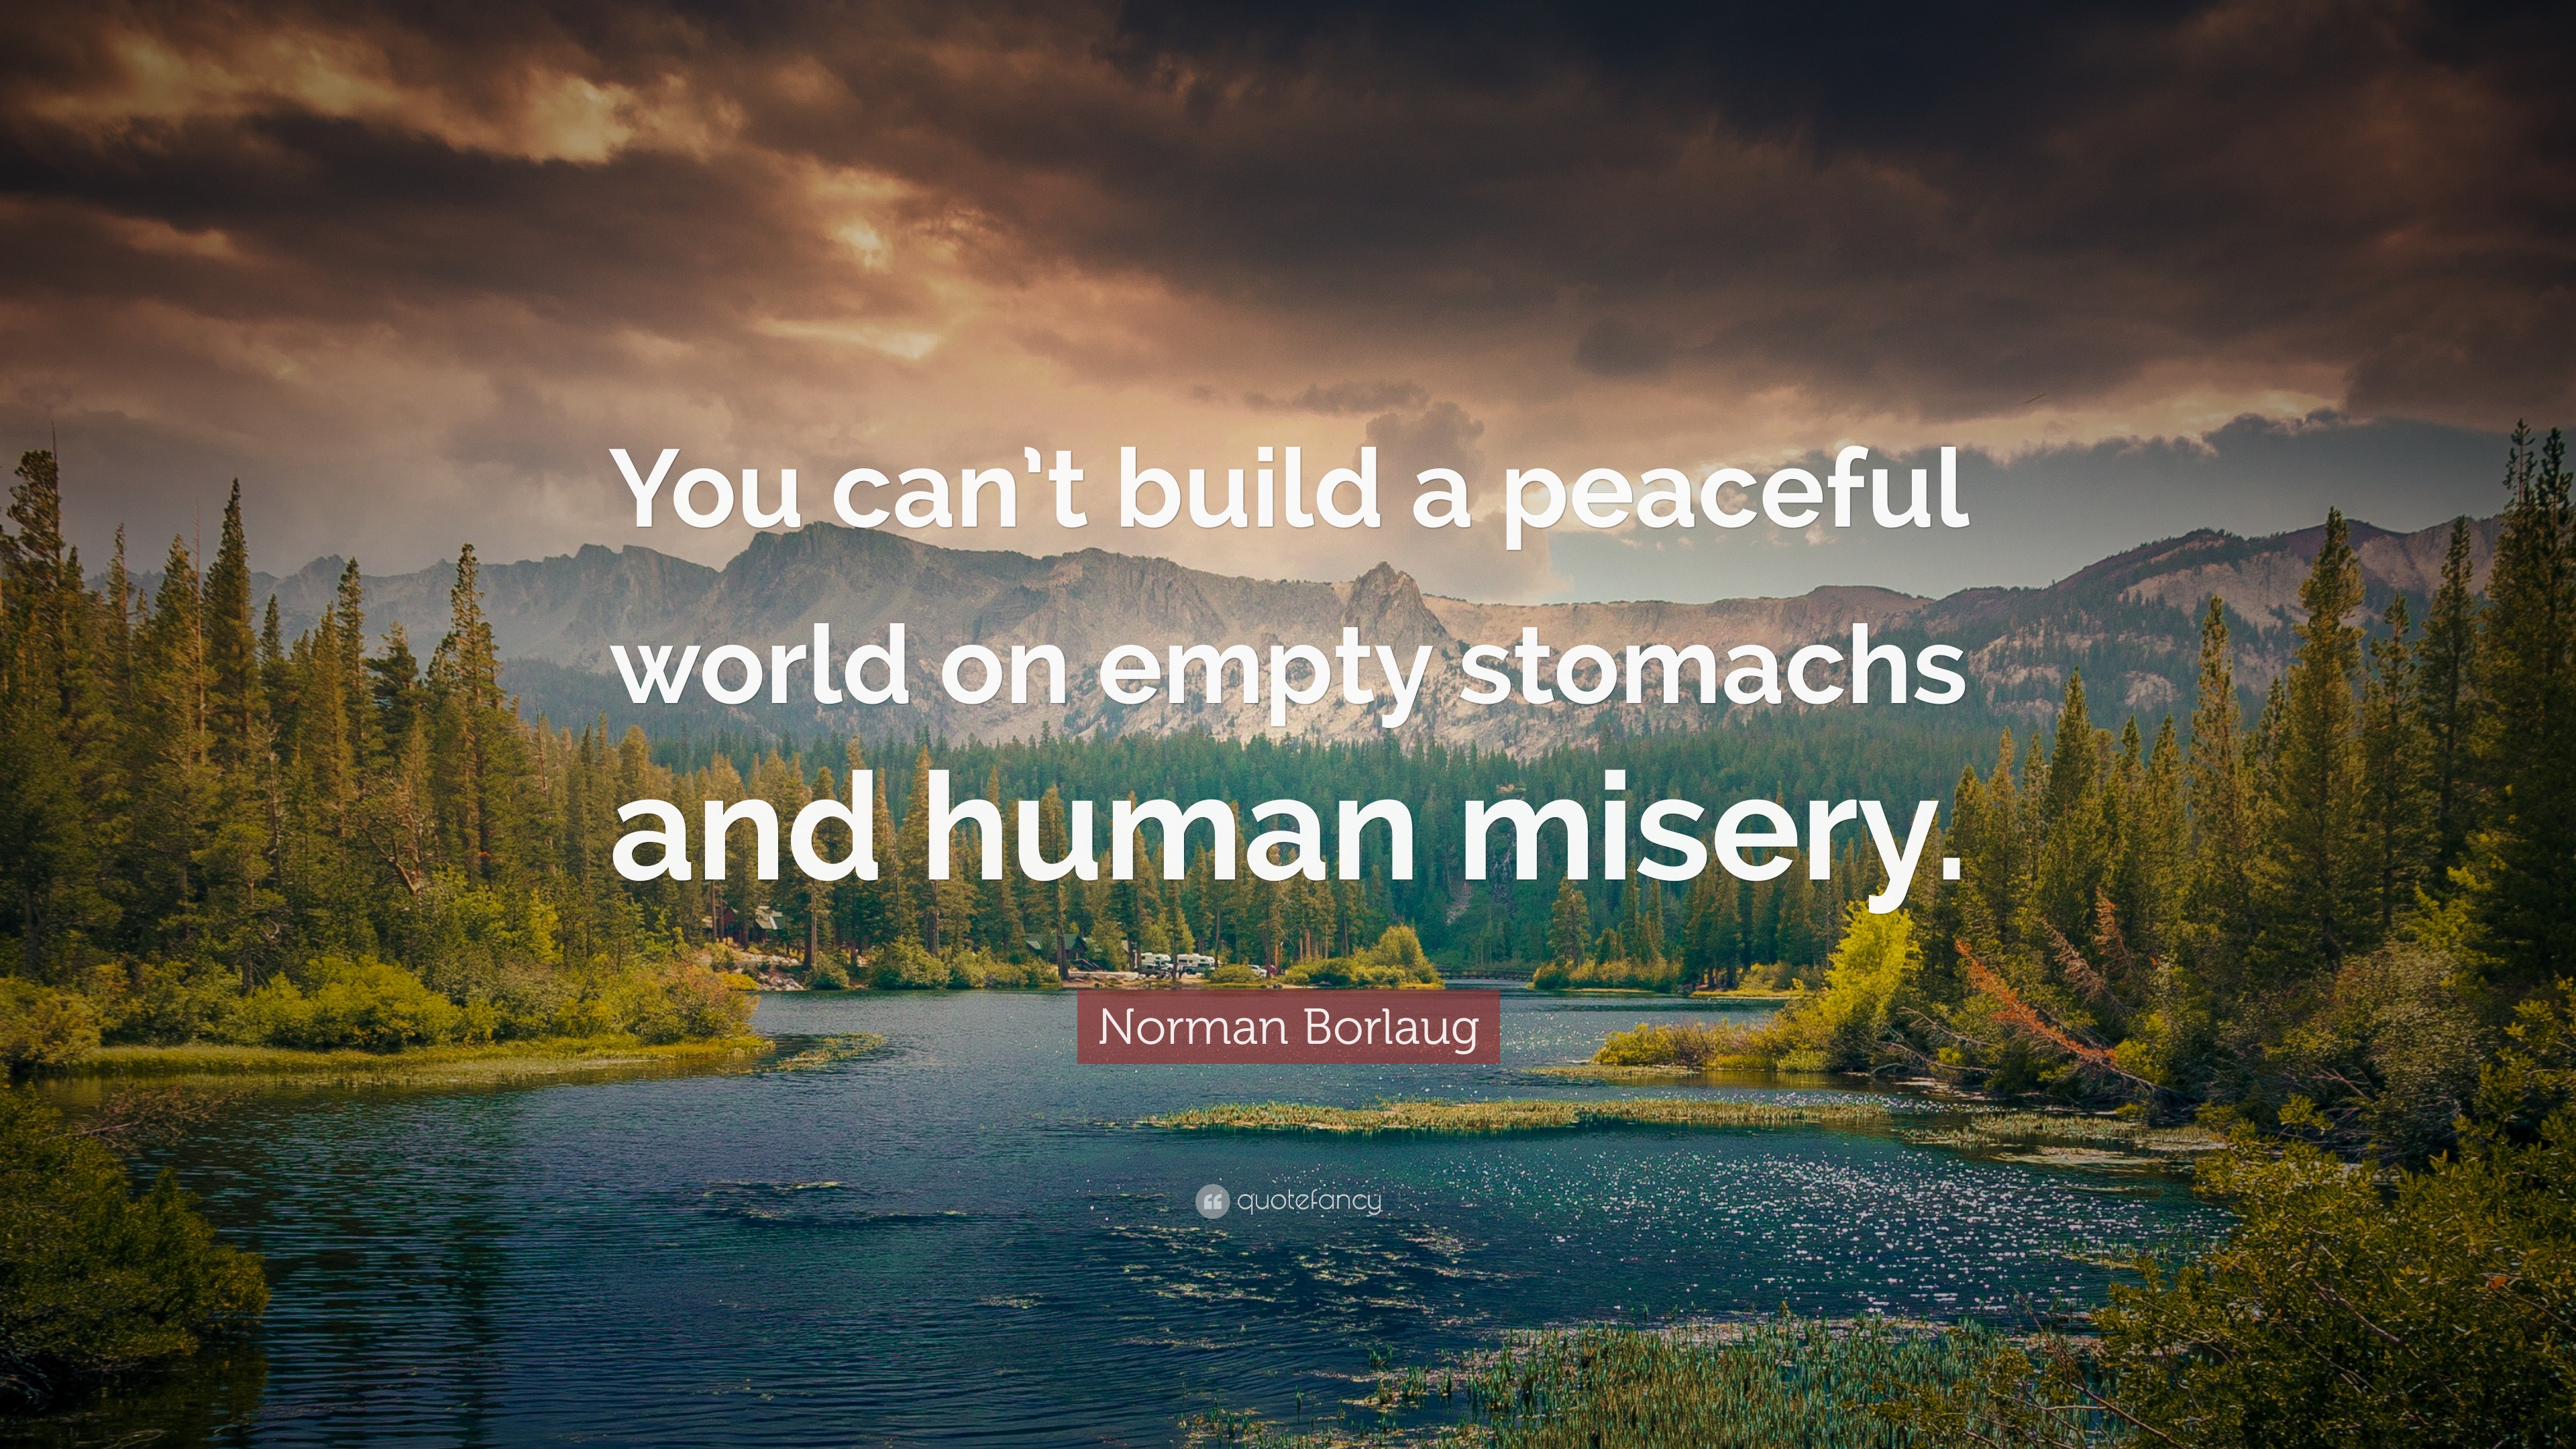 Norman Borlaug Quote: “You can’t build a peaceful world on empty